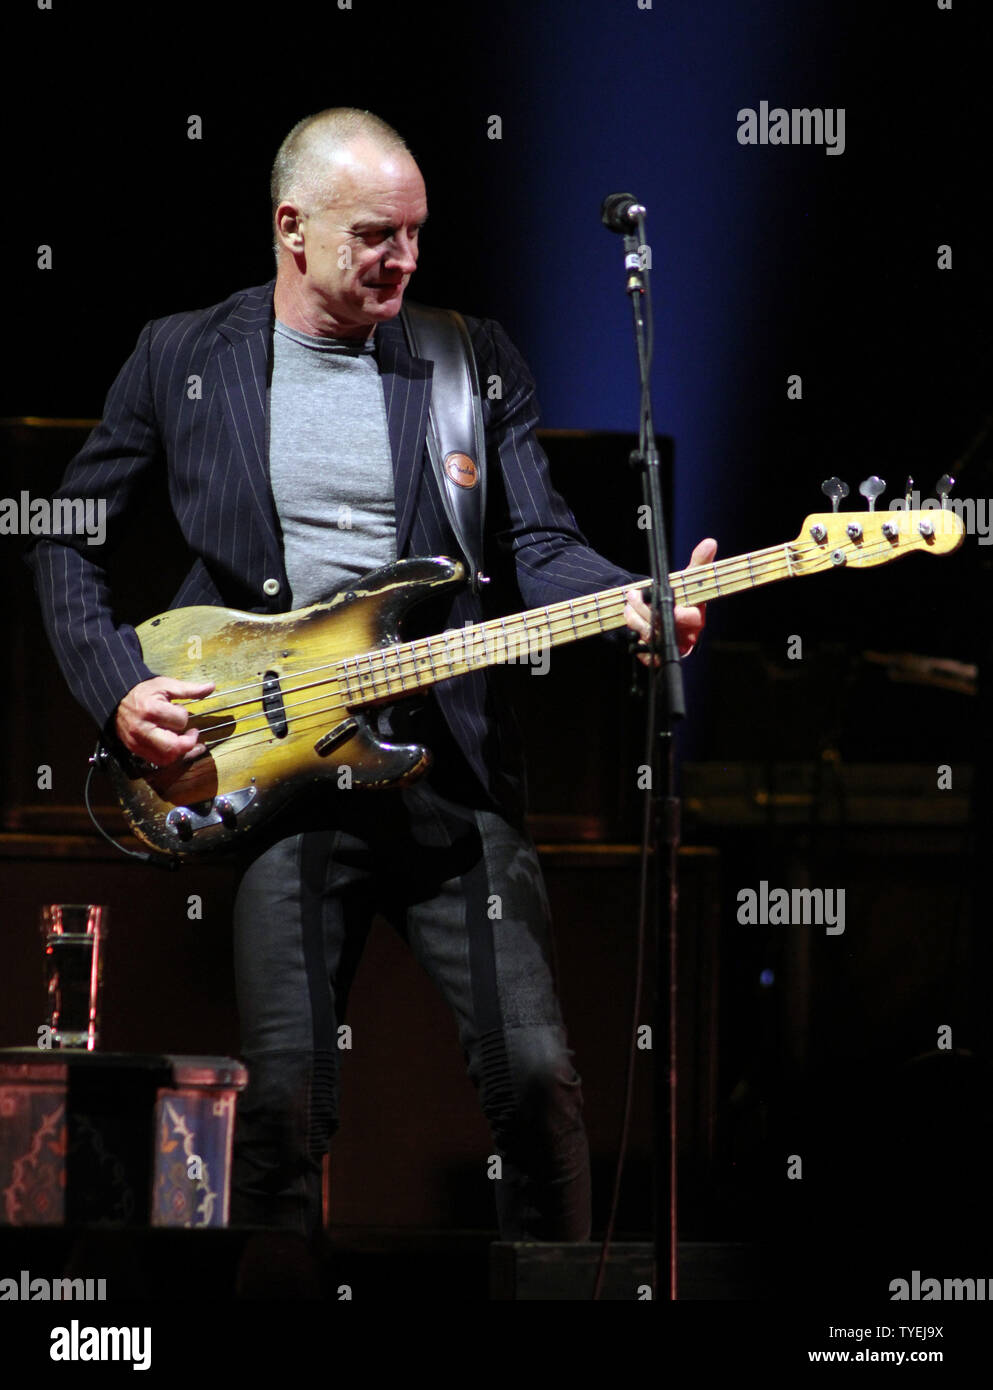 Sting performs in concert with Paul Simon at the BB & T Center in Sunrise, Florida on March 15, 2014.  UPI/Michael Bush Stock Photo